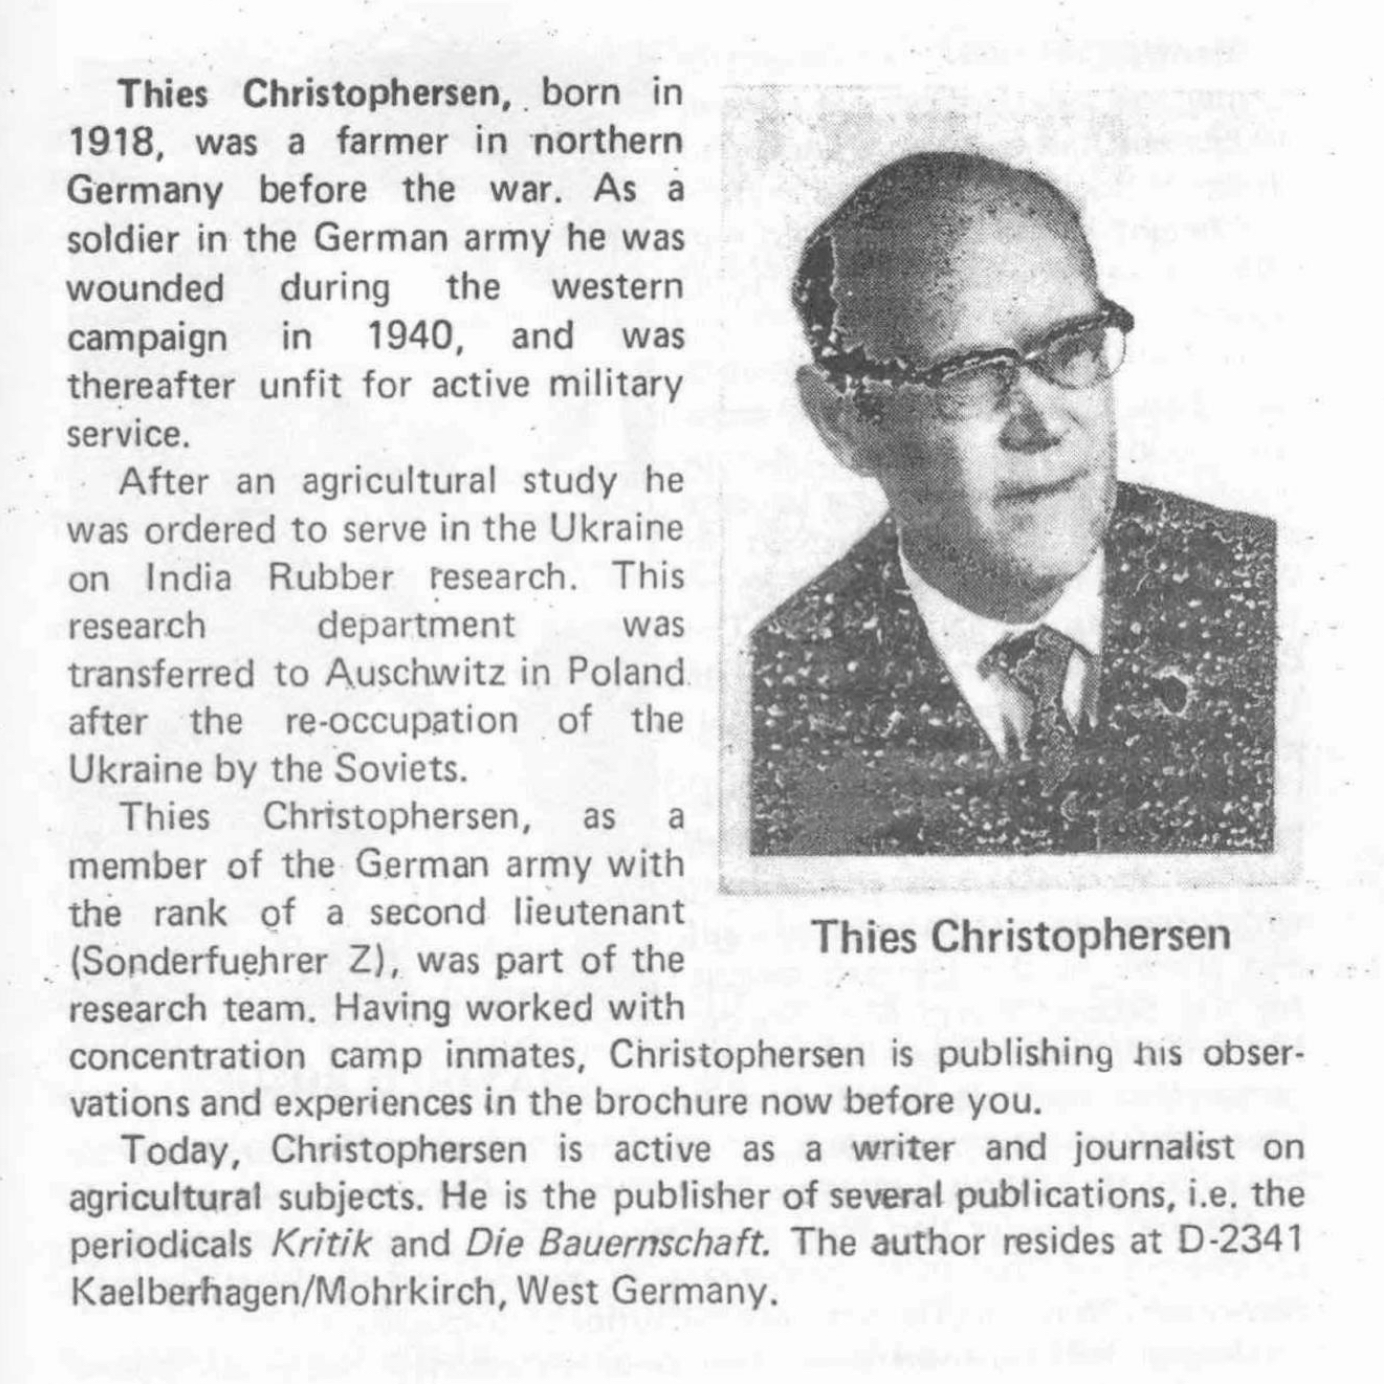 Biography of Thies Christophersen page